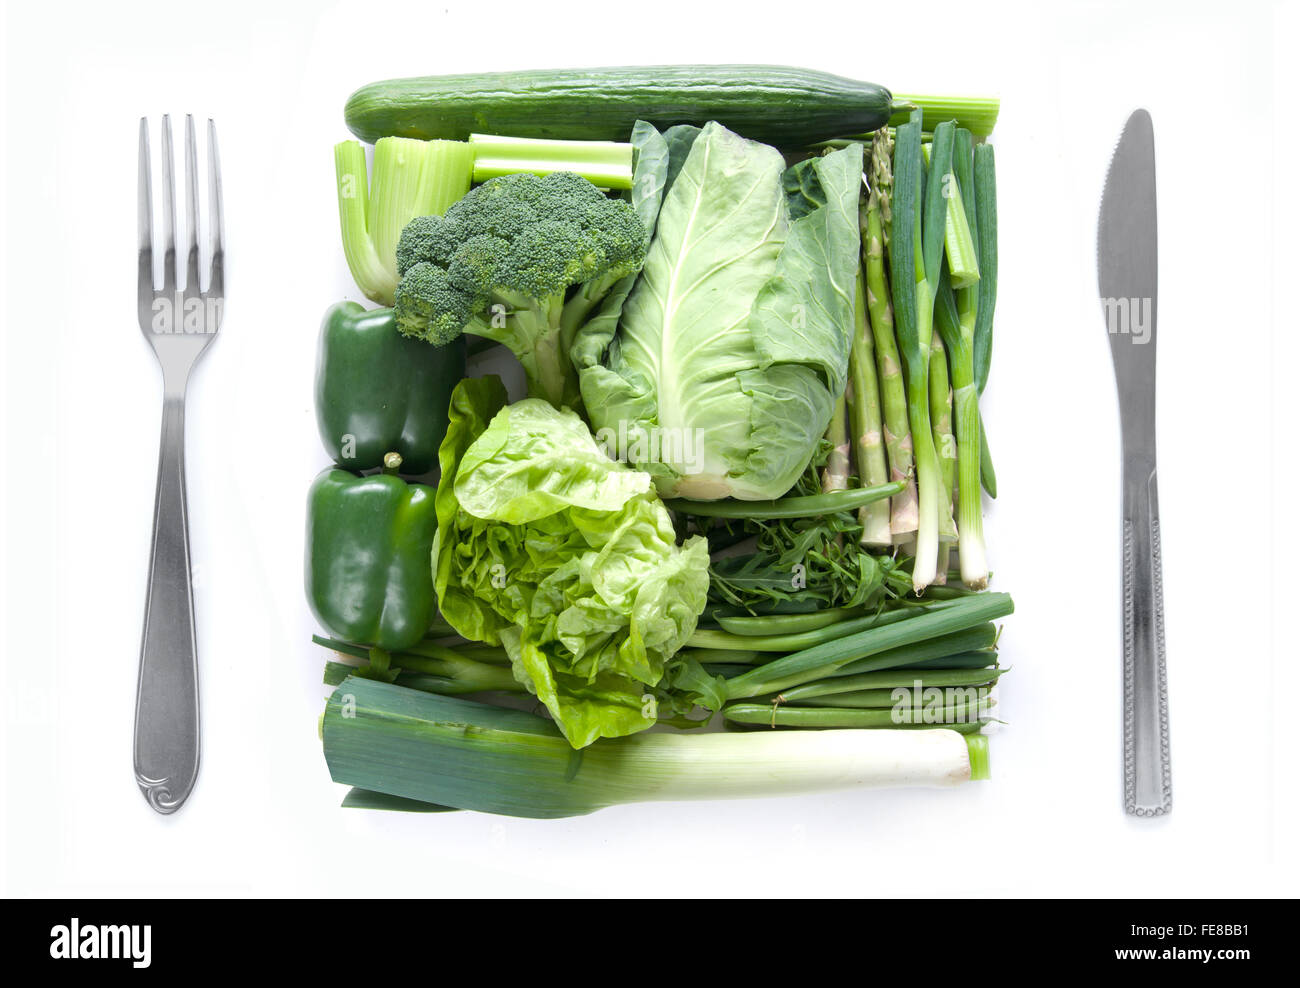 Miniature fresh green vegetables packed together as a meal Stock Photo